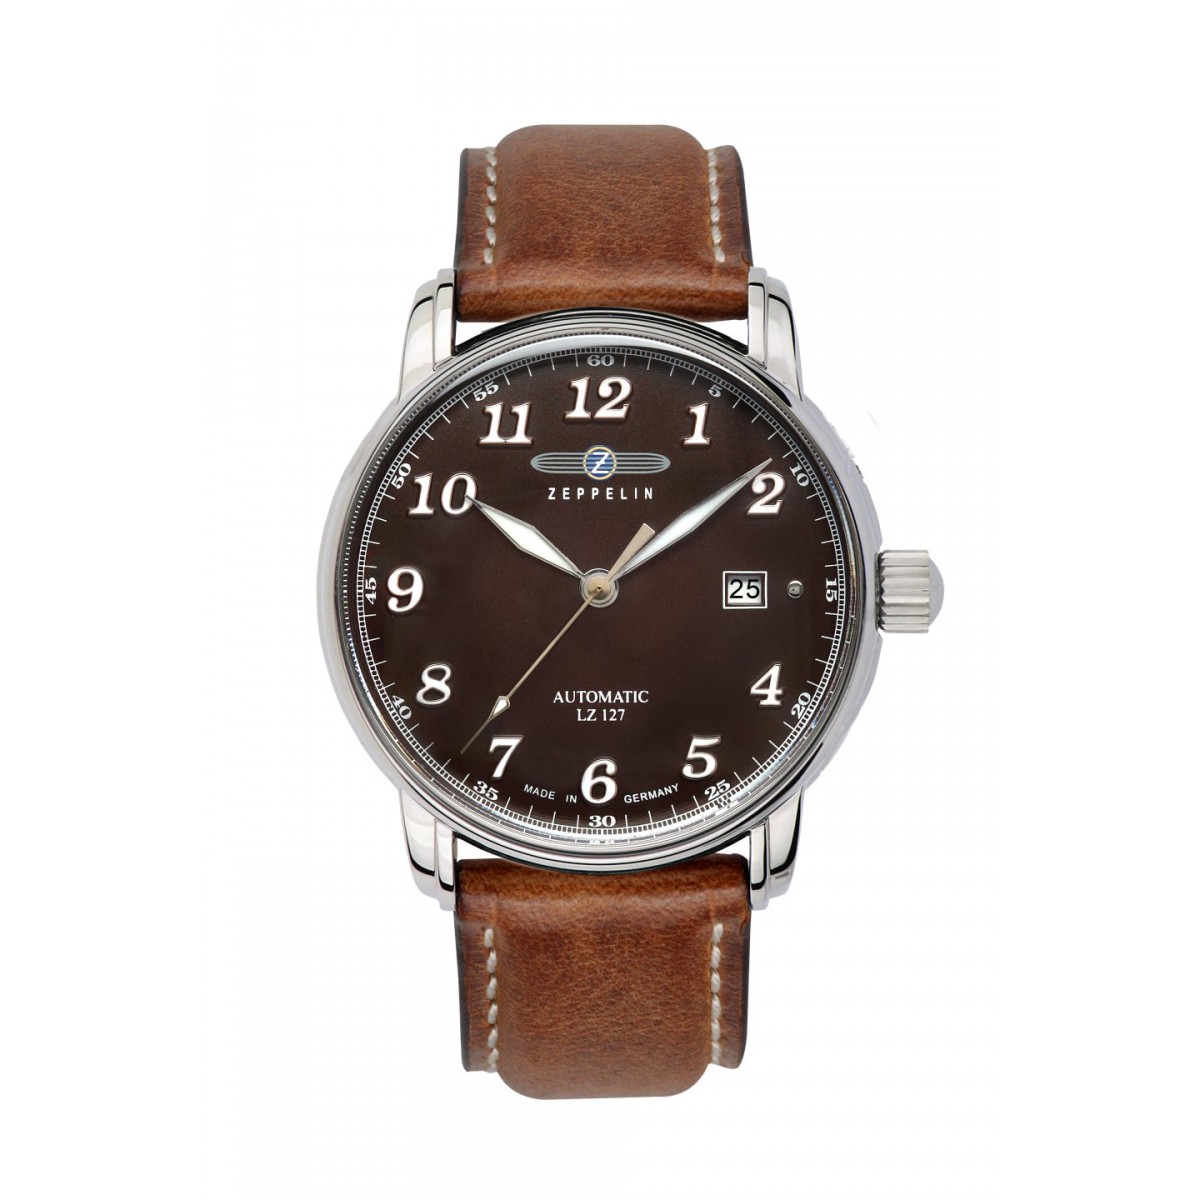 LZ127 Graf Zeppelin Automatic with date and leather strap